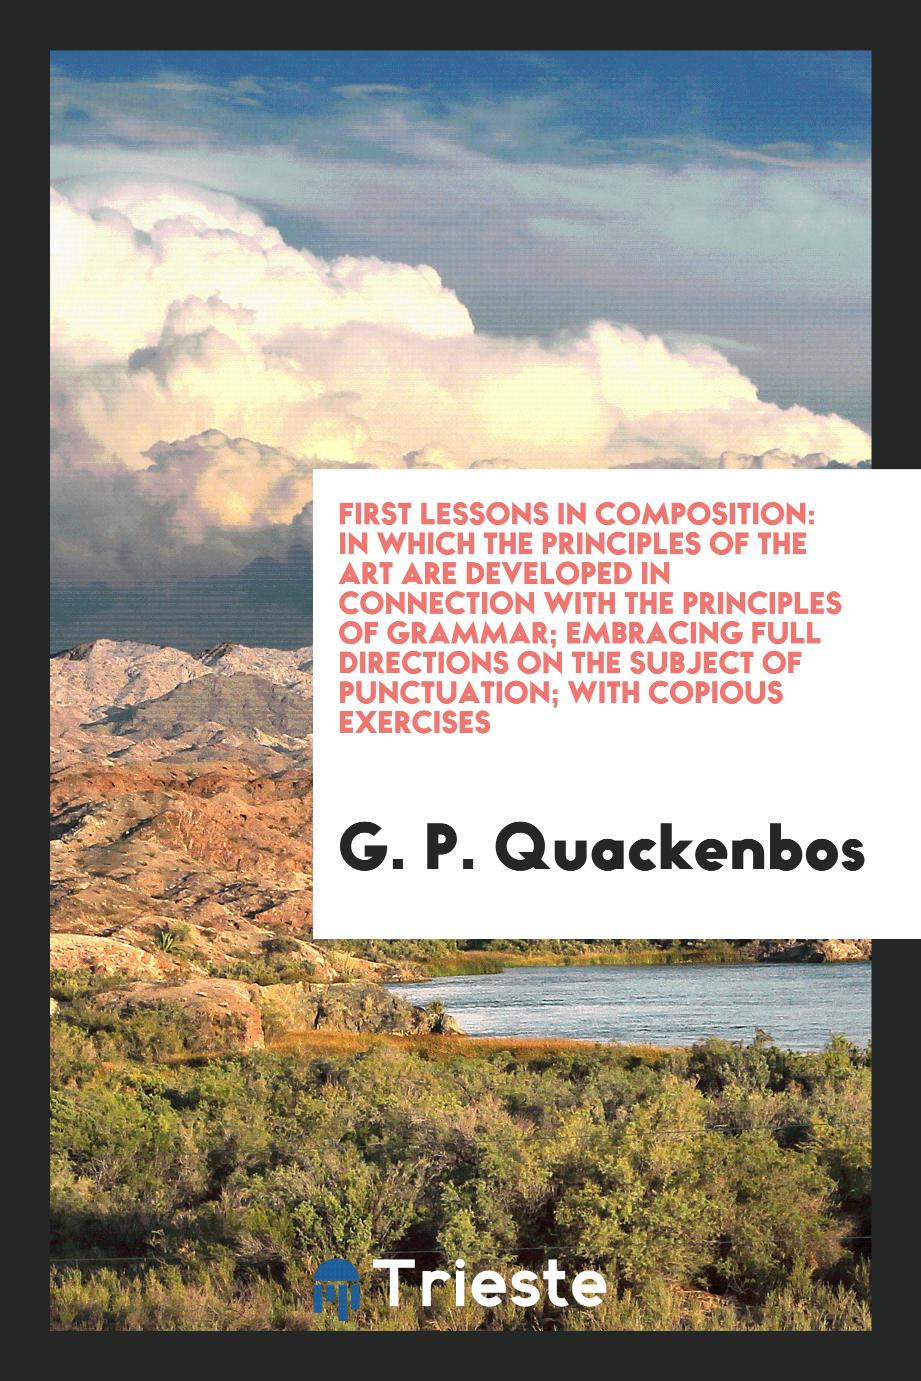 G. P. Quackenbos - First Lessons in Composition: In Which the Principles of the Art Are Developed in Connection with the Principles of Grammar; Embracing Full Directions on the Subject of Punctuation; With Copious Exercises